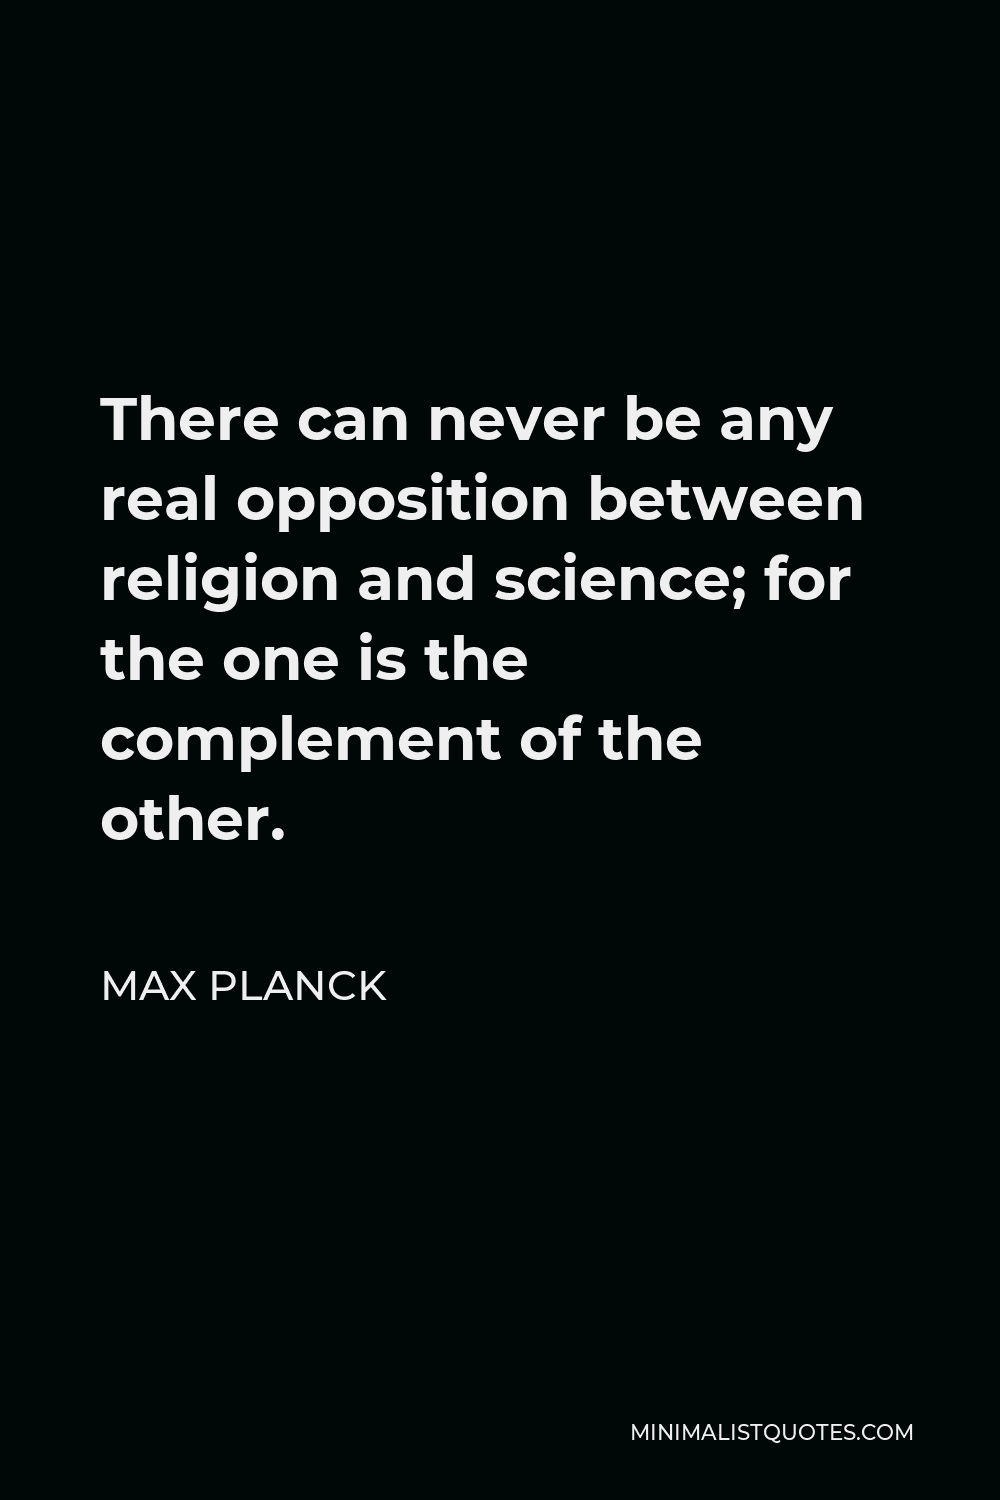 Max Planck Quote - There can never be any real opposition between religion and science; for the one is the complement of the other.